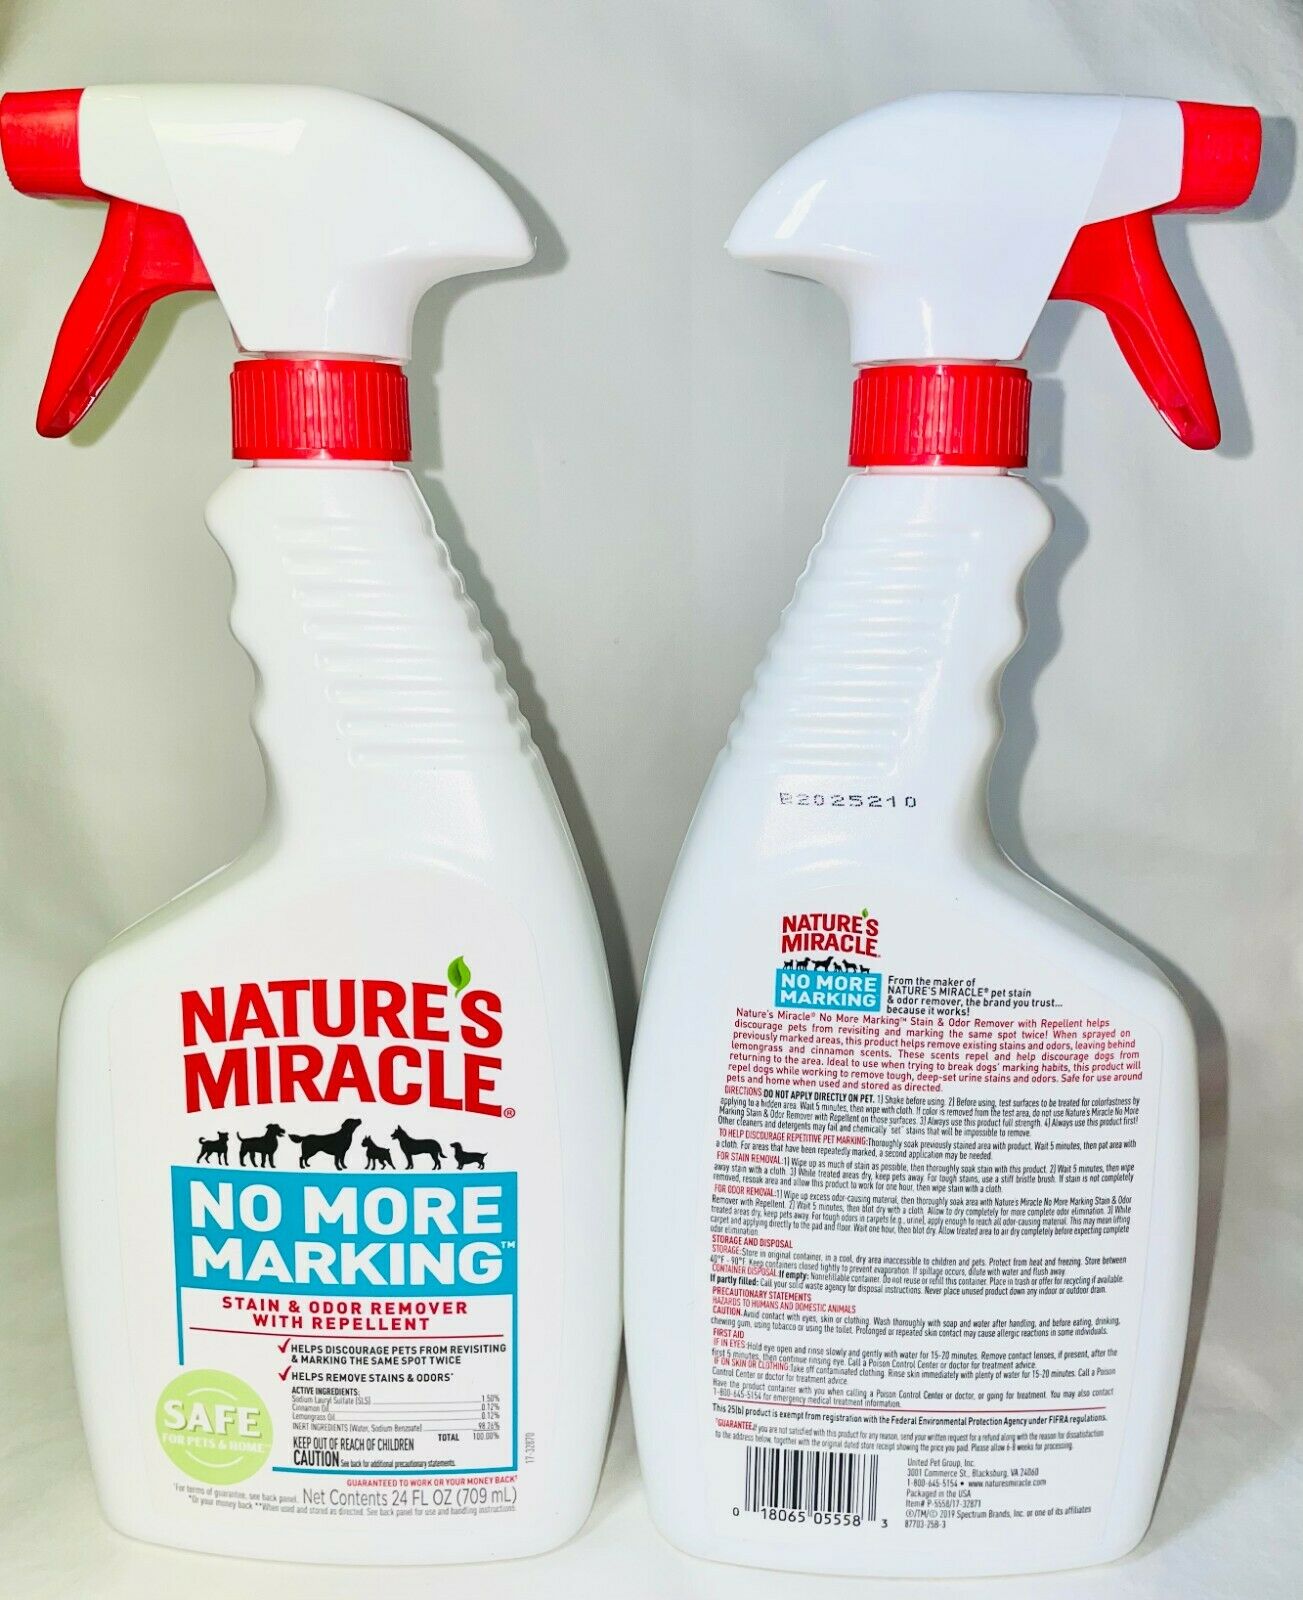 Nature's Miracle No More Marking Pet Stain & Odor Remover Free Shipping